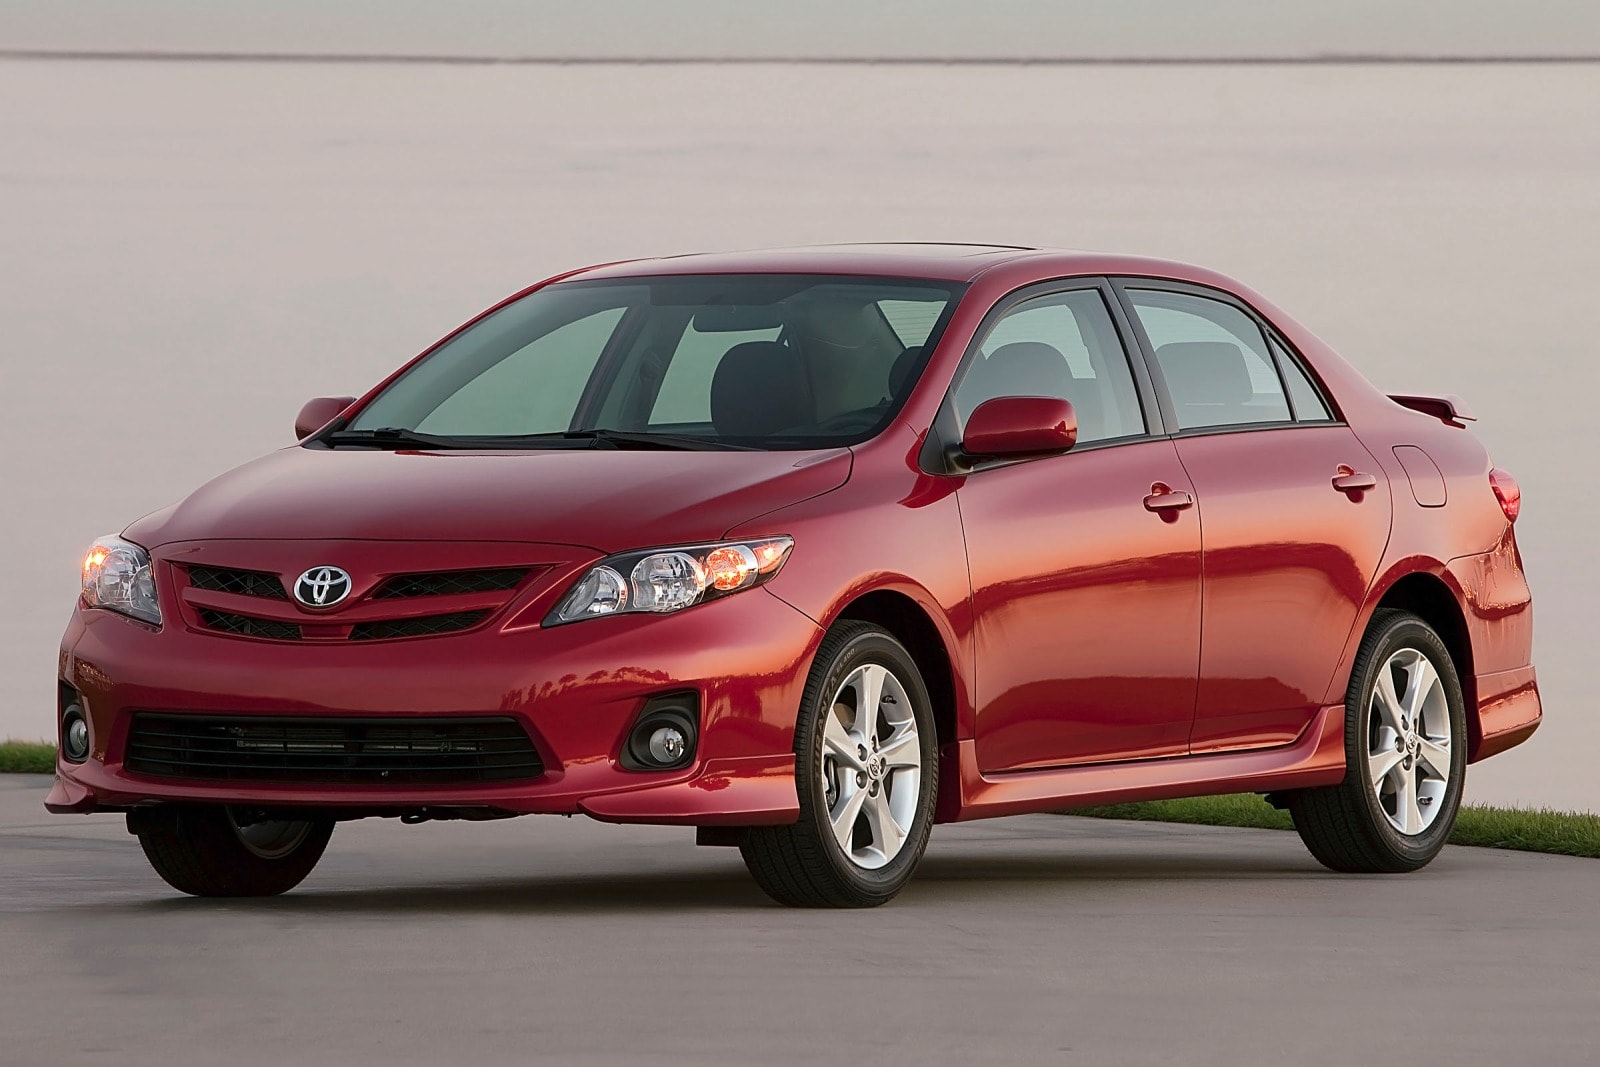 2012 Toyota Corolla Review & Ratings | Edmunds